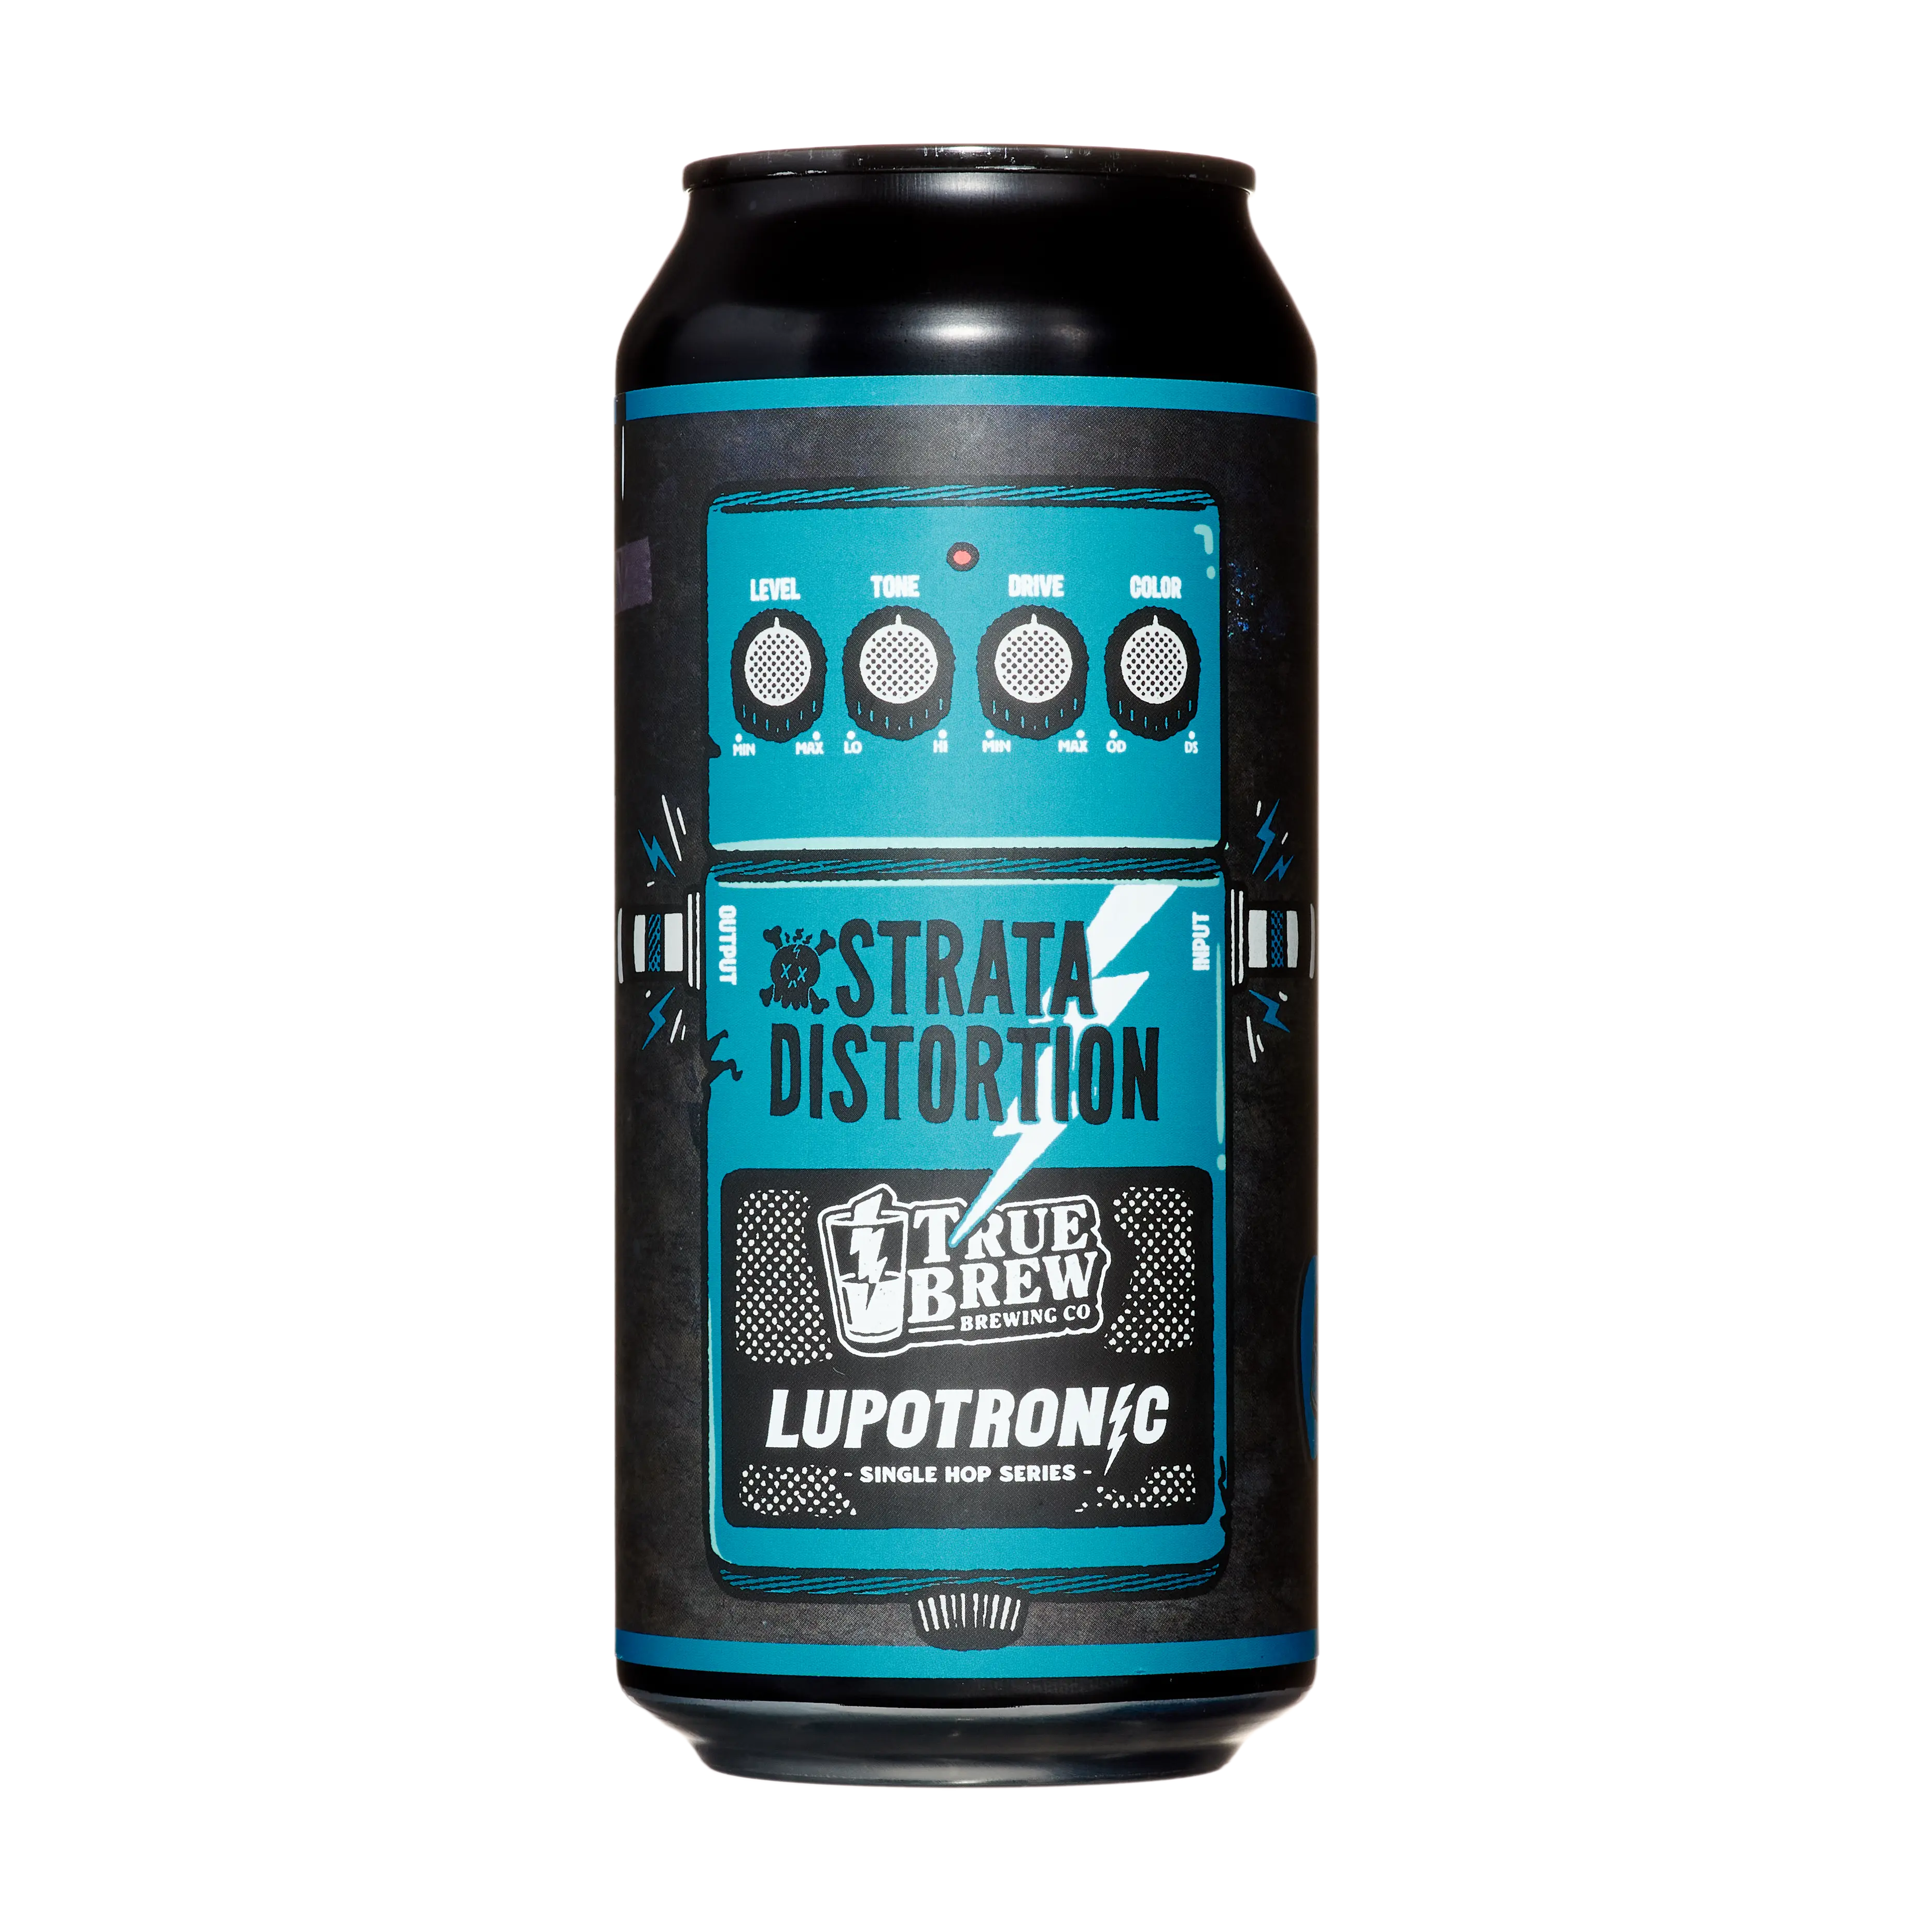 True Brew Brewing Co Lupotronic Strata Distortion